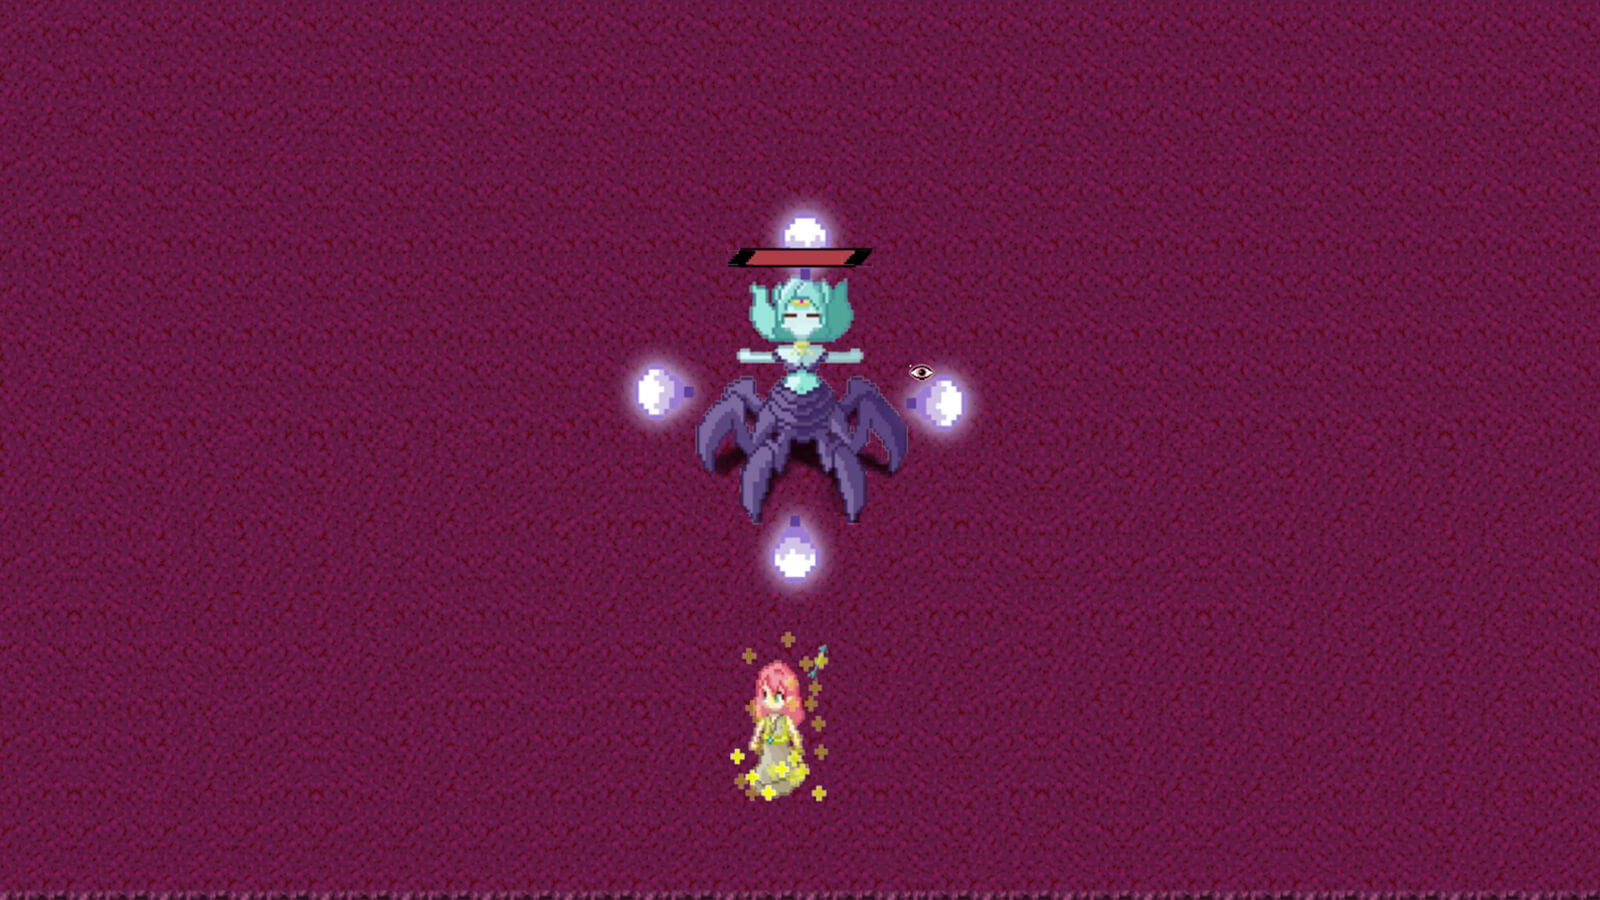 A turquoise-colored boss with six purple legs stands next to a smaller character with red hair